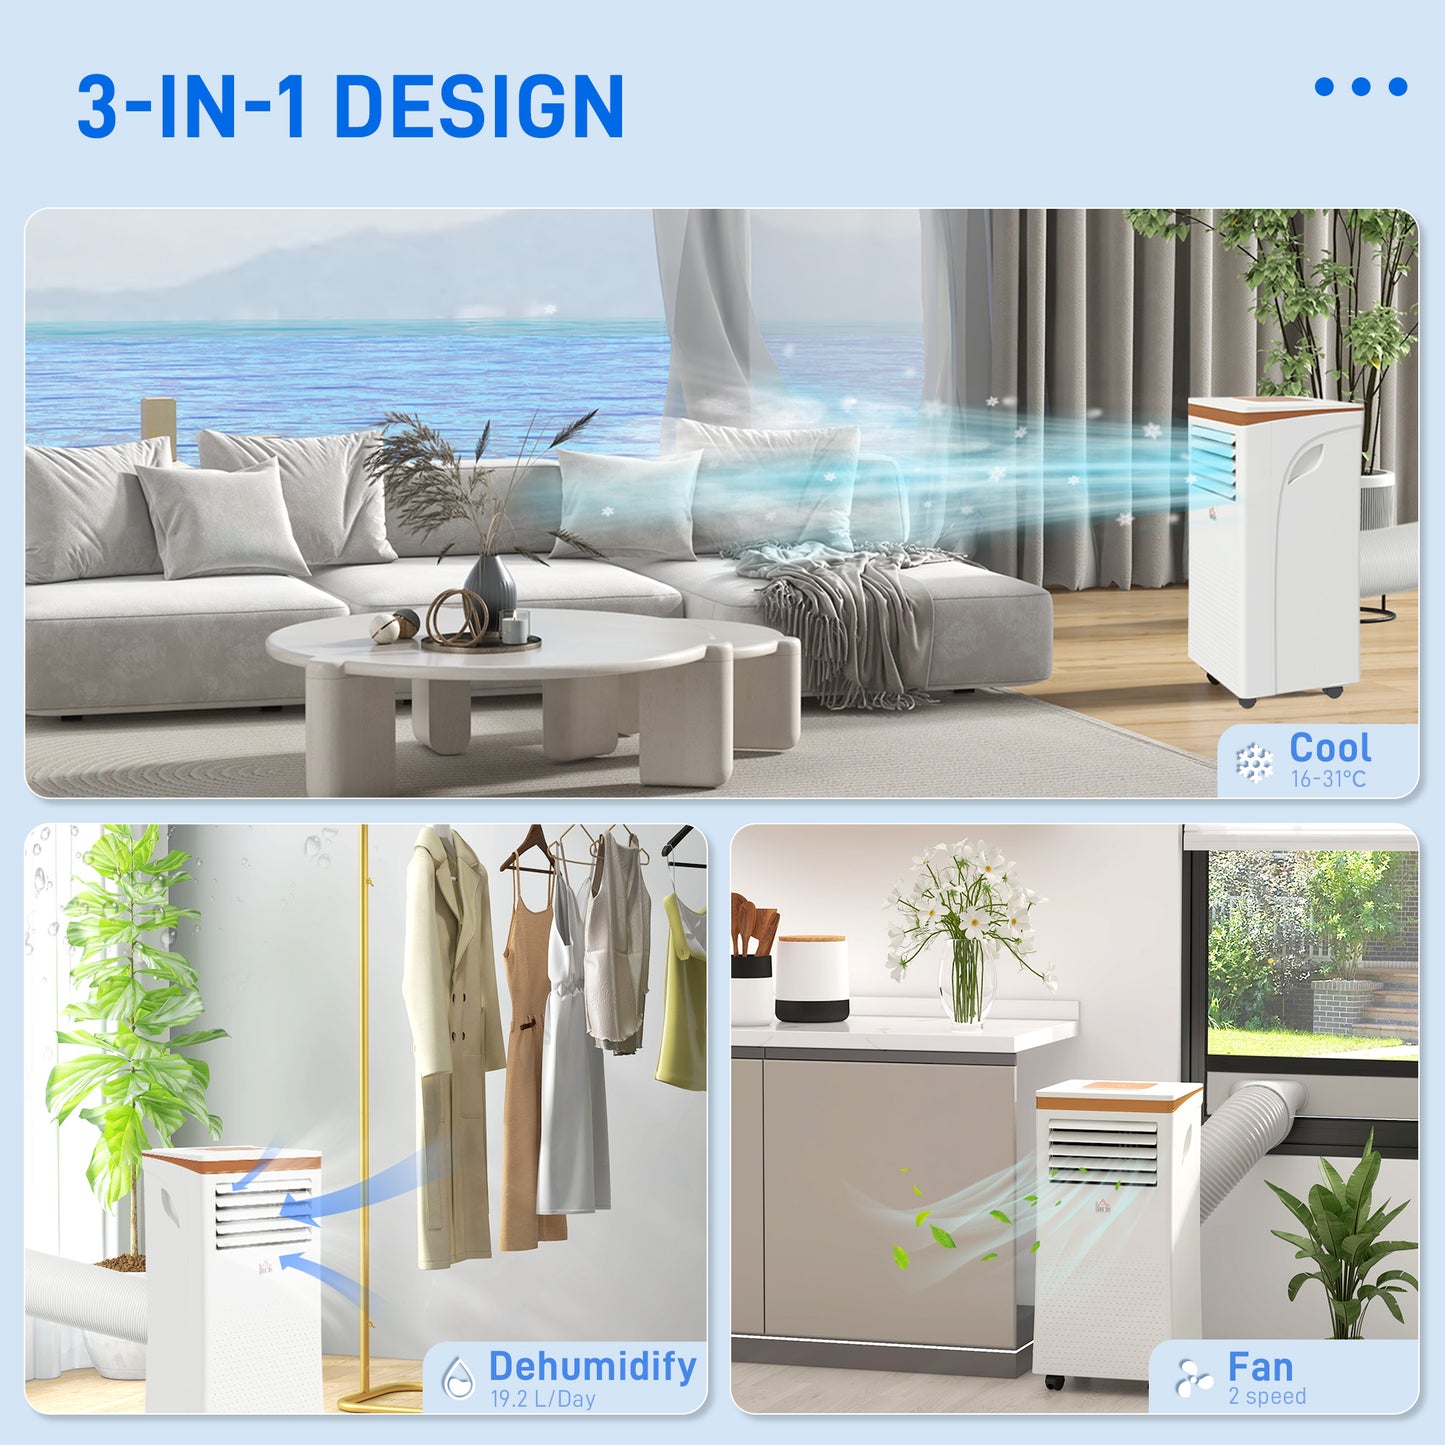 HOMCOM 7000 BTU 4-In-1 Compact Portable Mobile Air Conditioner Unit Cooling Dehumidifying Ventilating w/ Fan Remote LED Display 24 Hr Auto Shut-Down